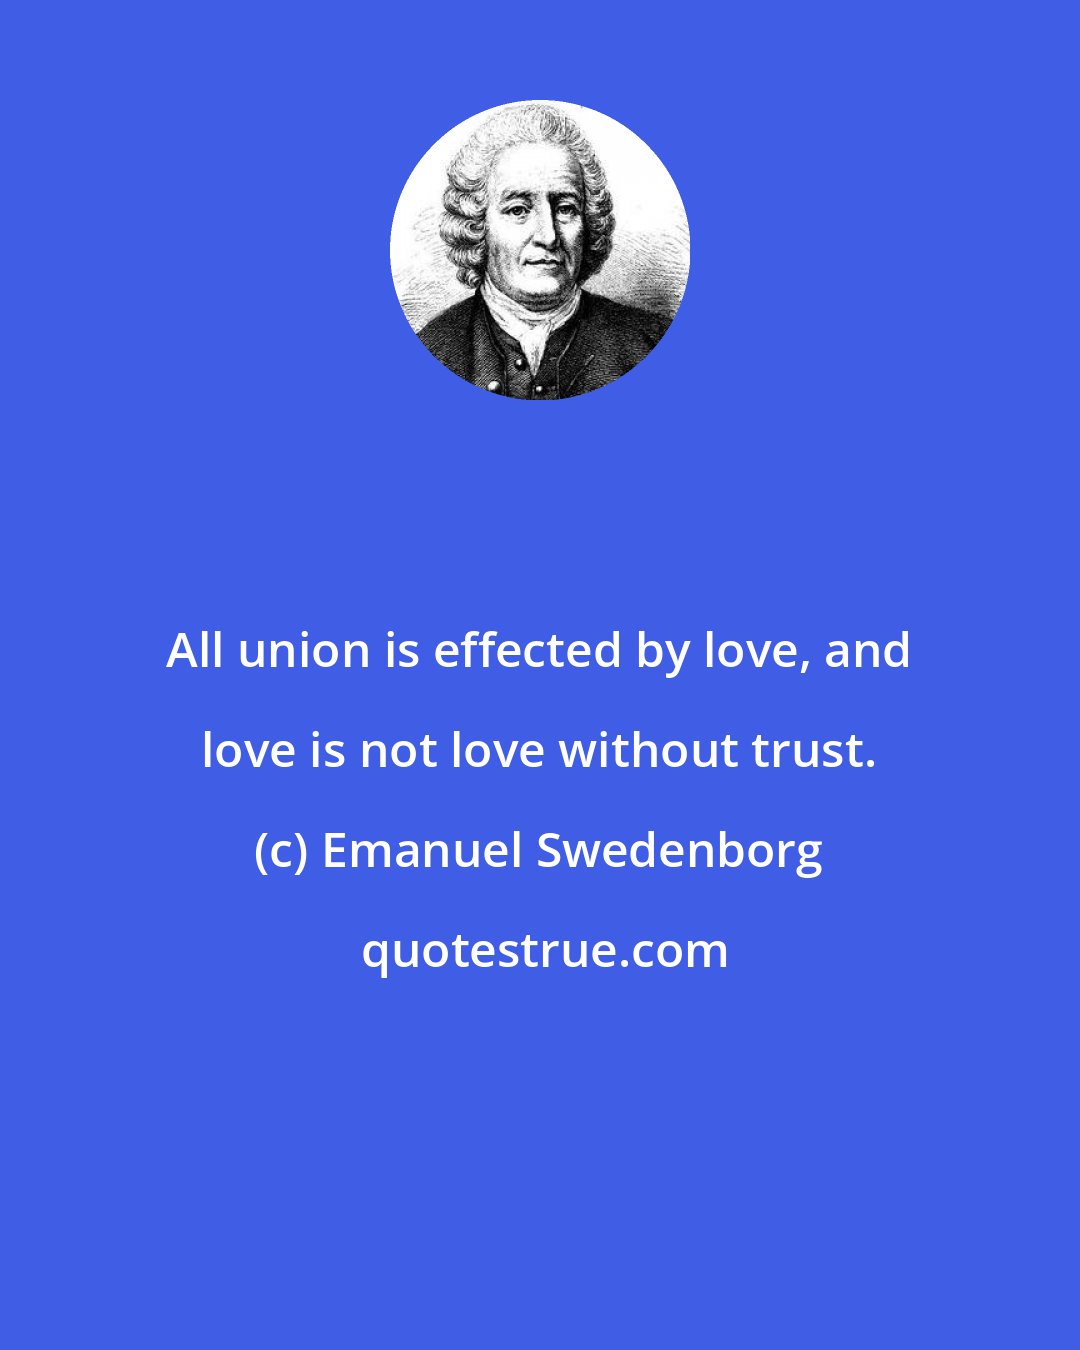 Emanuel Swedenborg: All union is effected by love, and love is not love without trust.